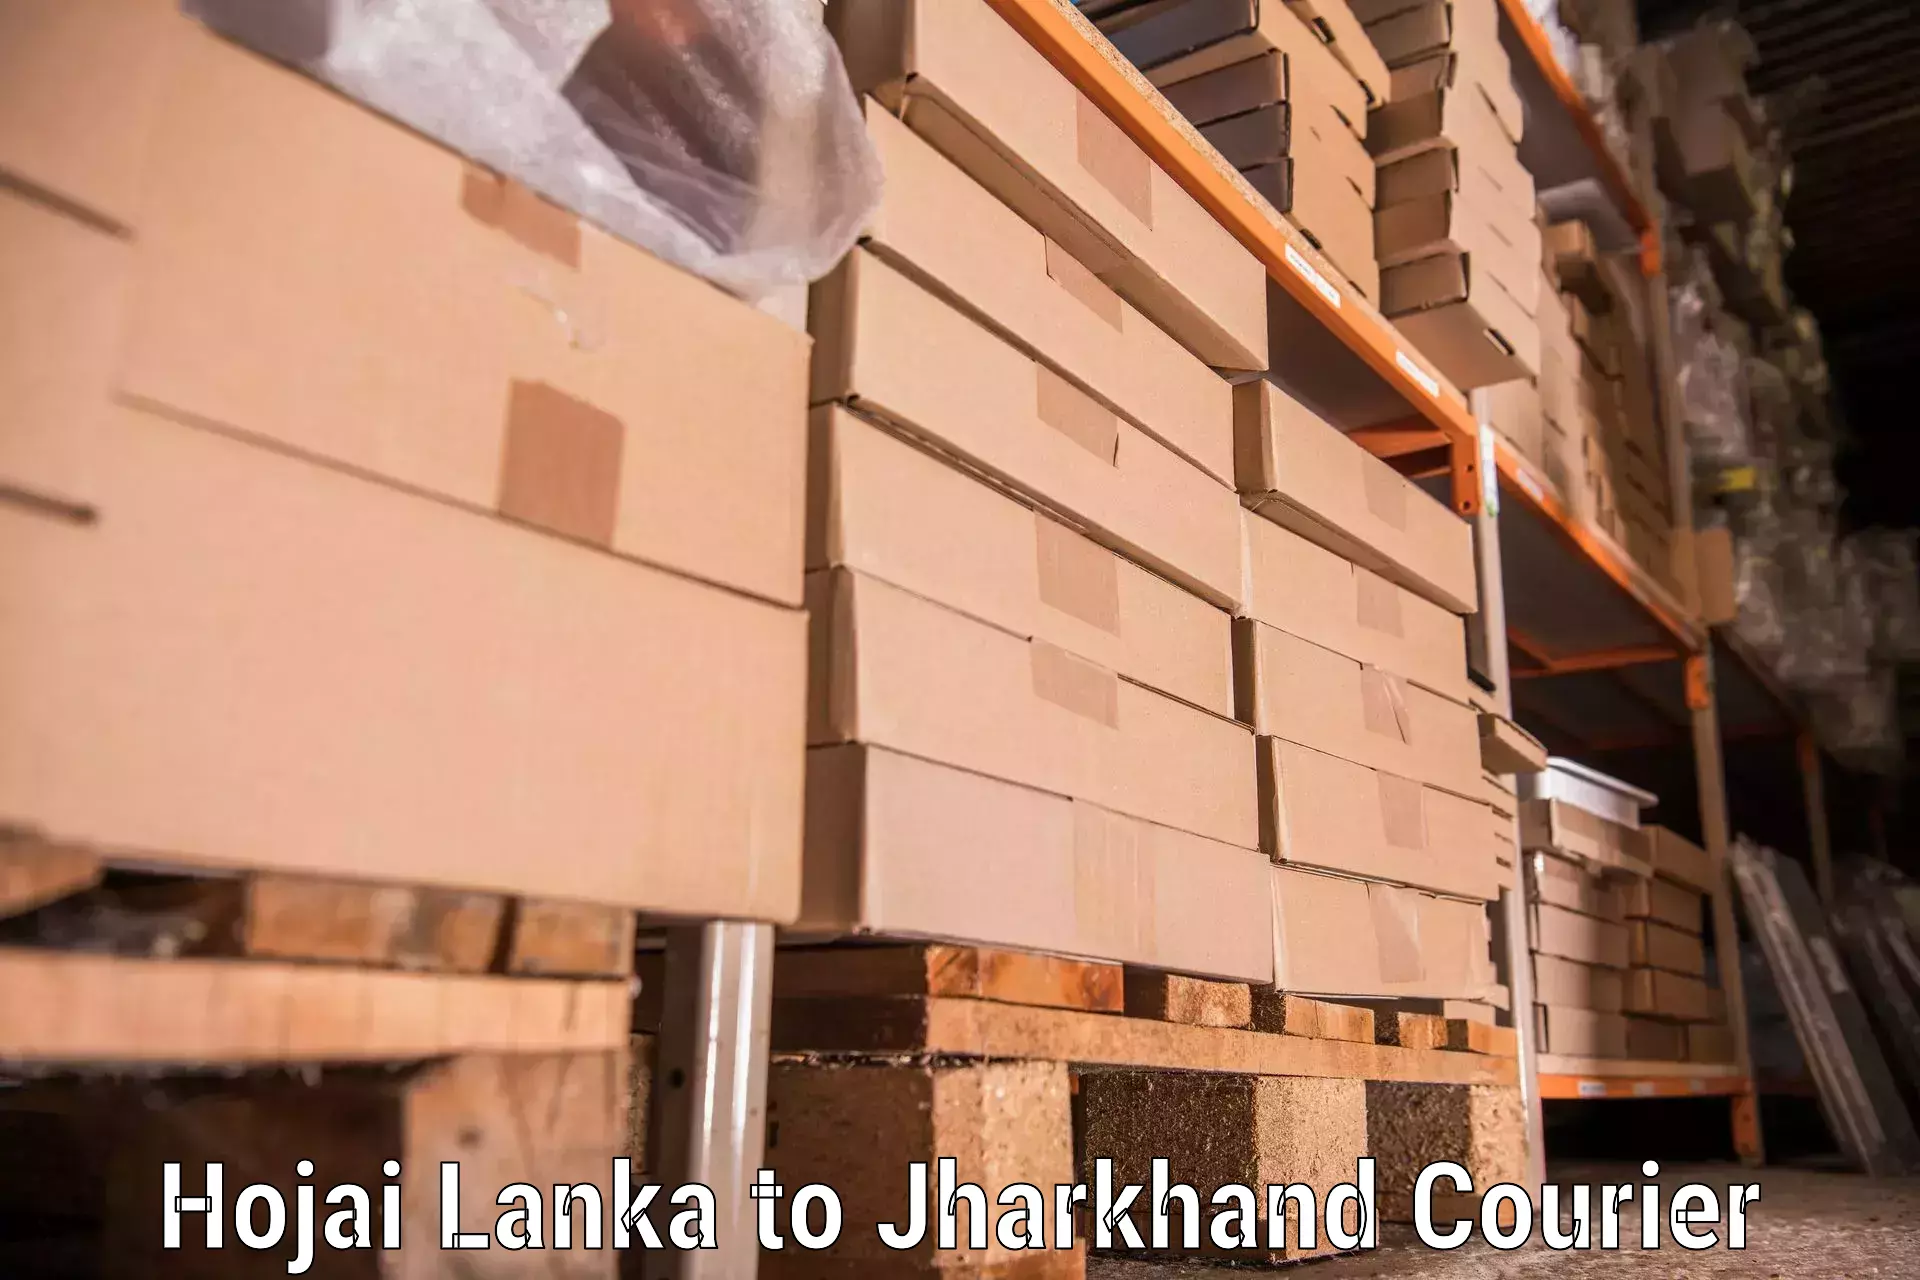 High-quality moving services Hojai Lanka to Chouparan